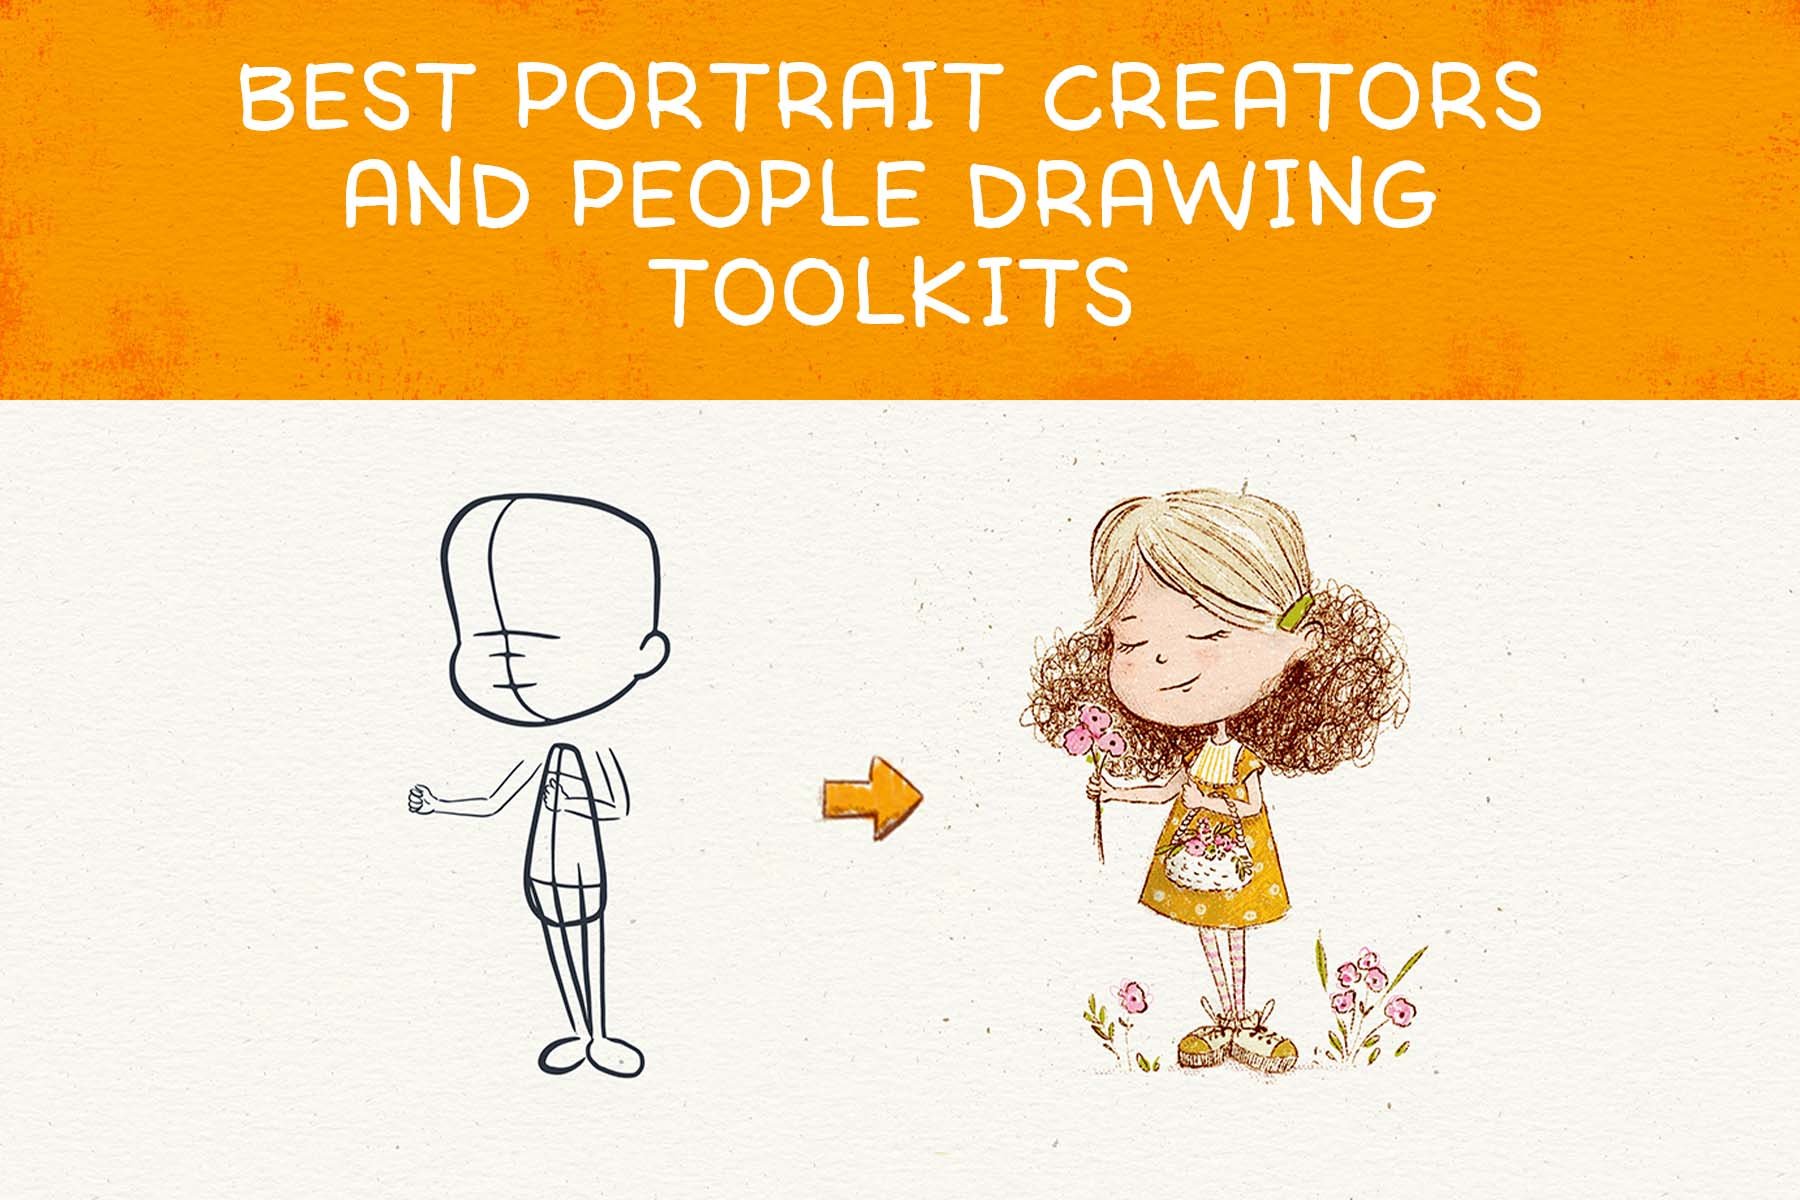 Best Portrait Creators and People Drawing Toolkits